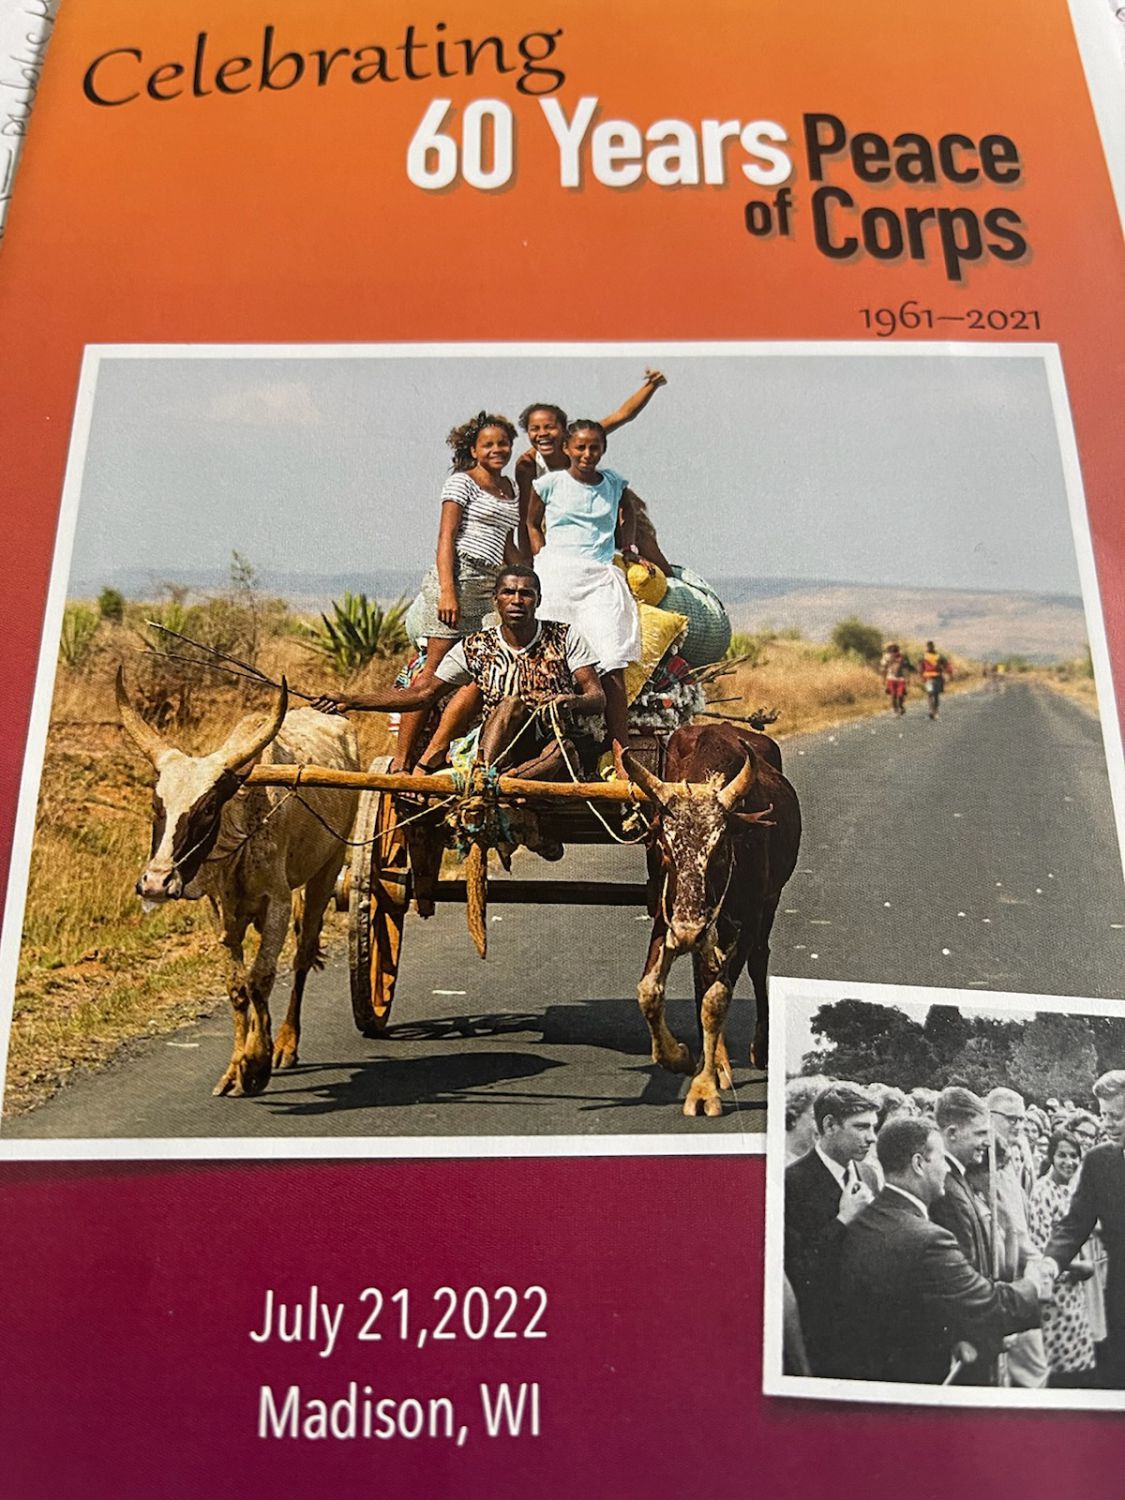 Peace Corps 60th anniversary